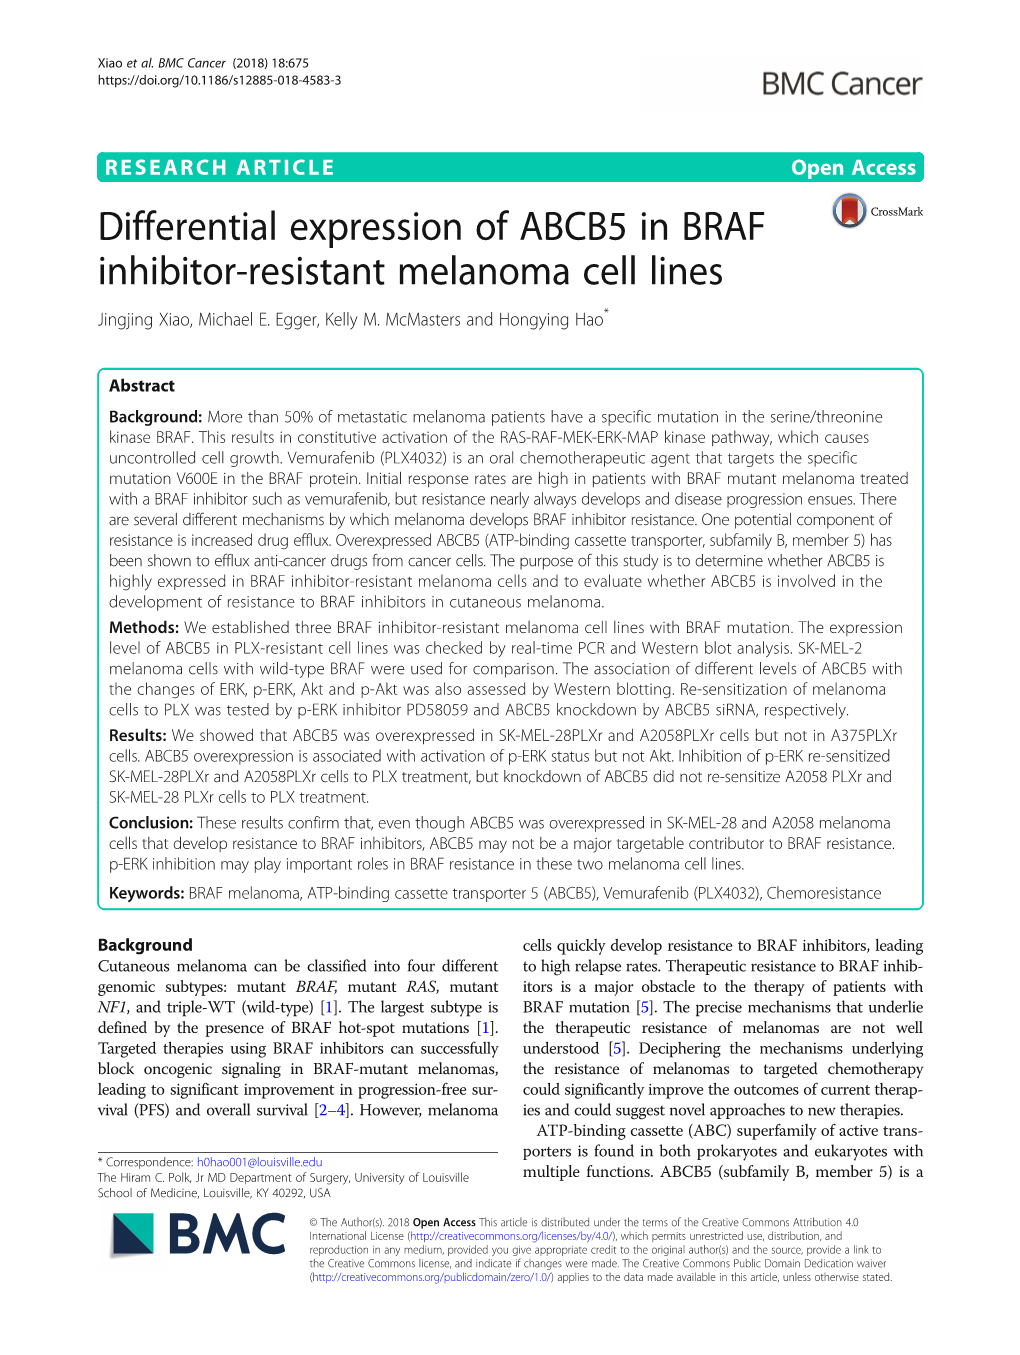 Differential Expression of ABCB5 in BRAF Inhibitor-Resistant Melanoma Cell Lines Jingjing Xiao, Michael E